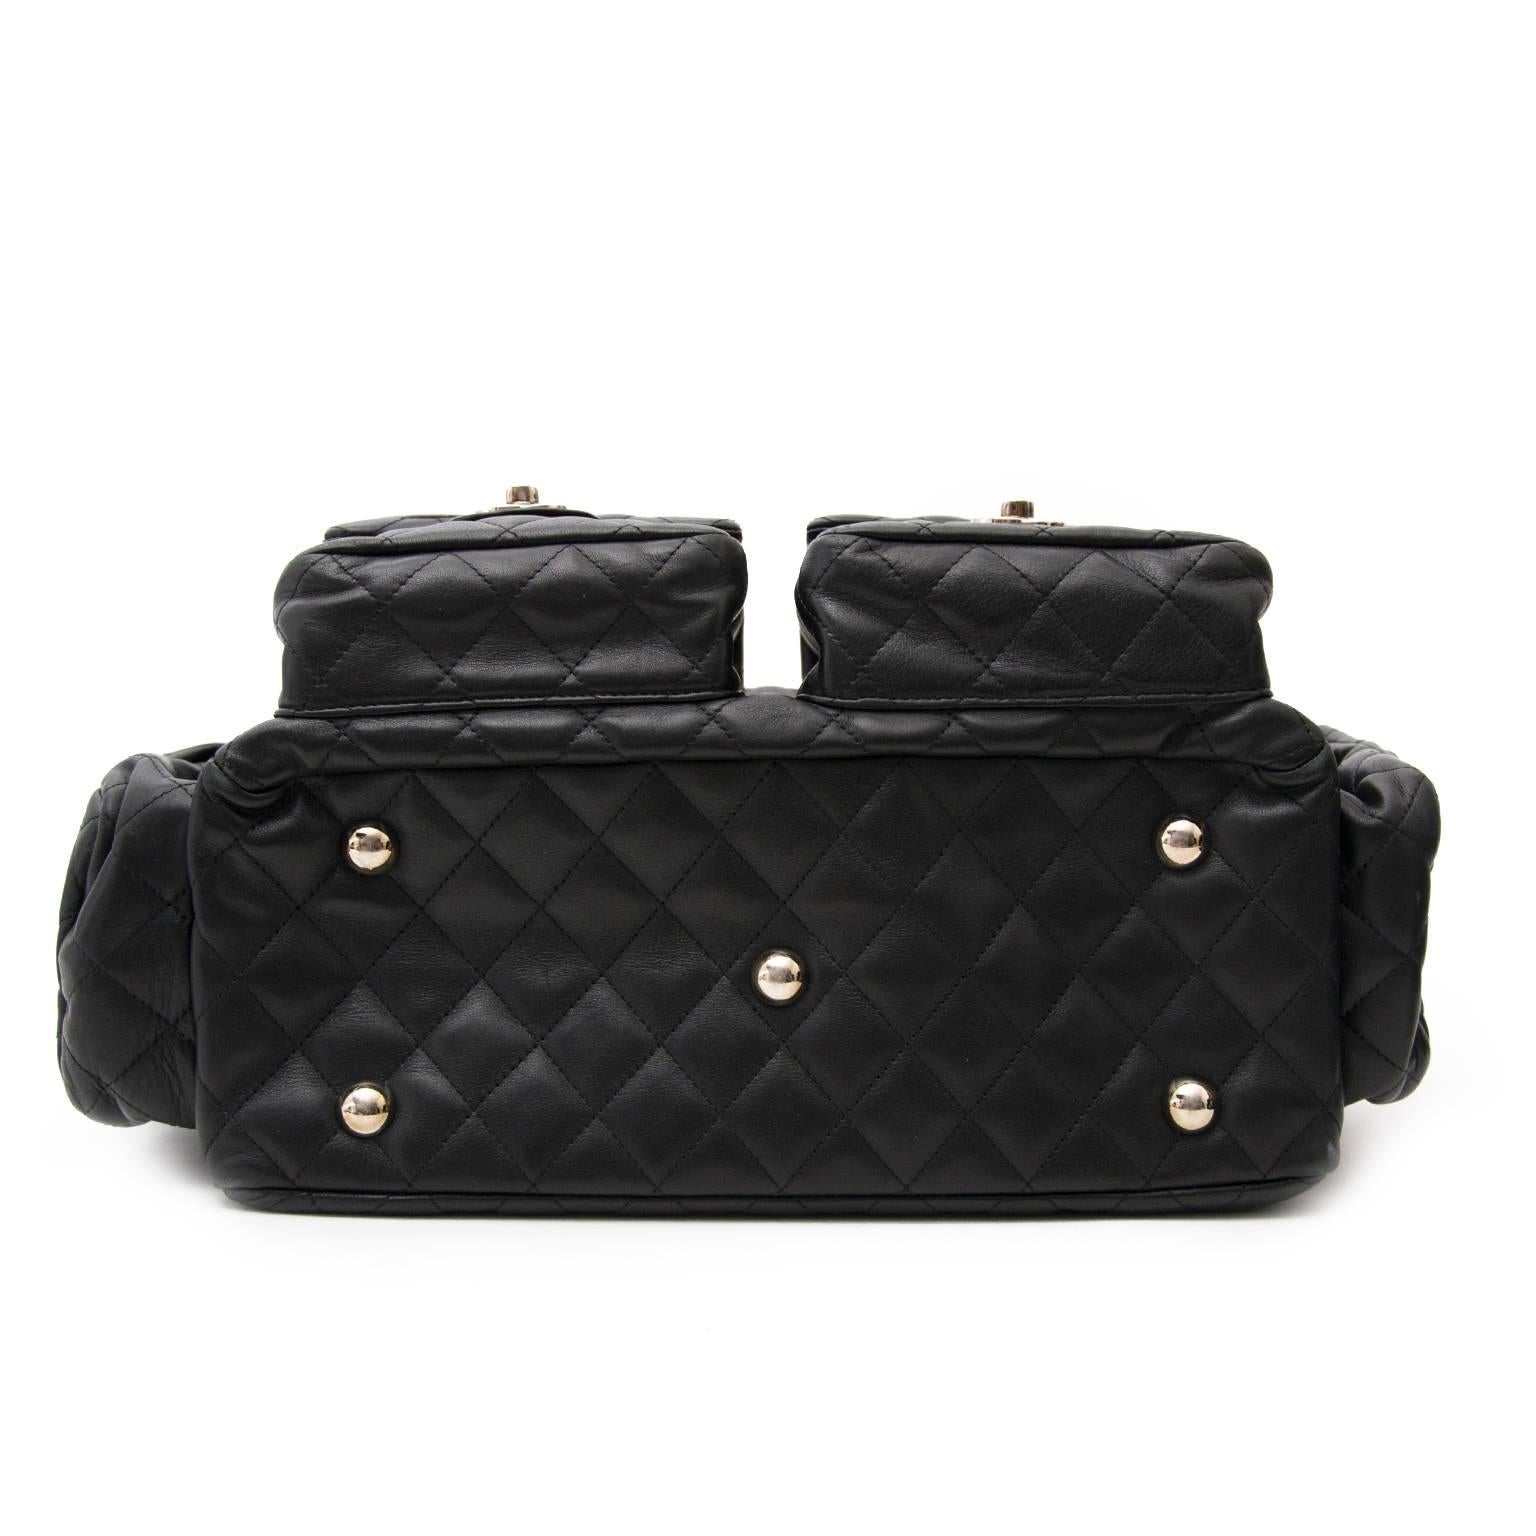 
Chanel Cambon Reporter Bag

Yet another iconic must-have piece from Chanel: the Cambon Reporter bag is both beautiful as practical. Its many pockets, which close by CC turn locks, allow you to carry your essentials in a safe and fashionable way.